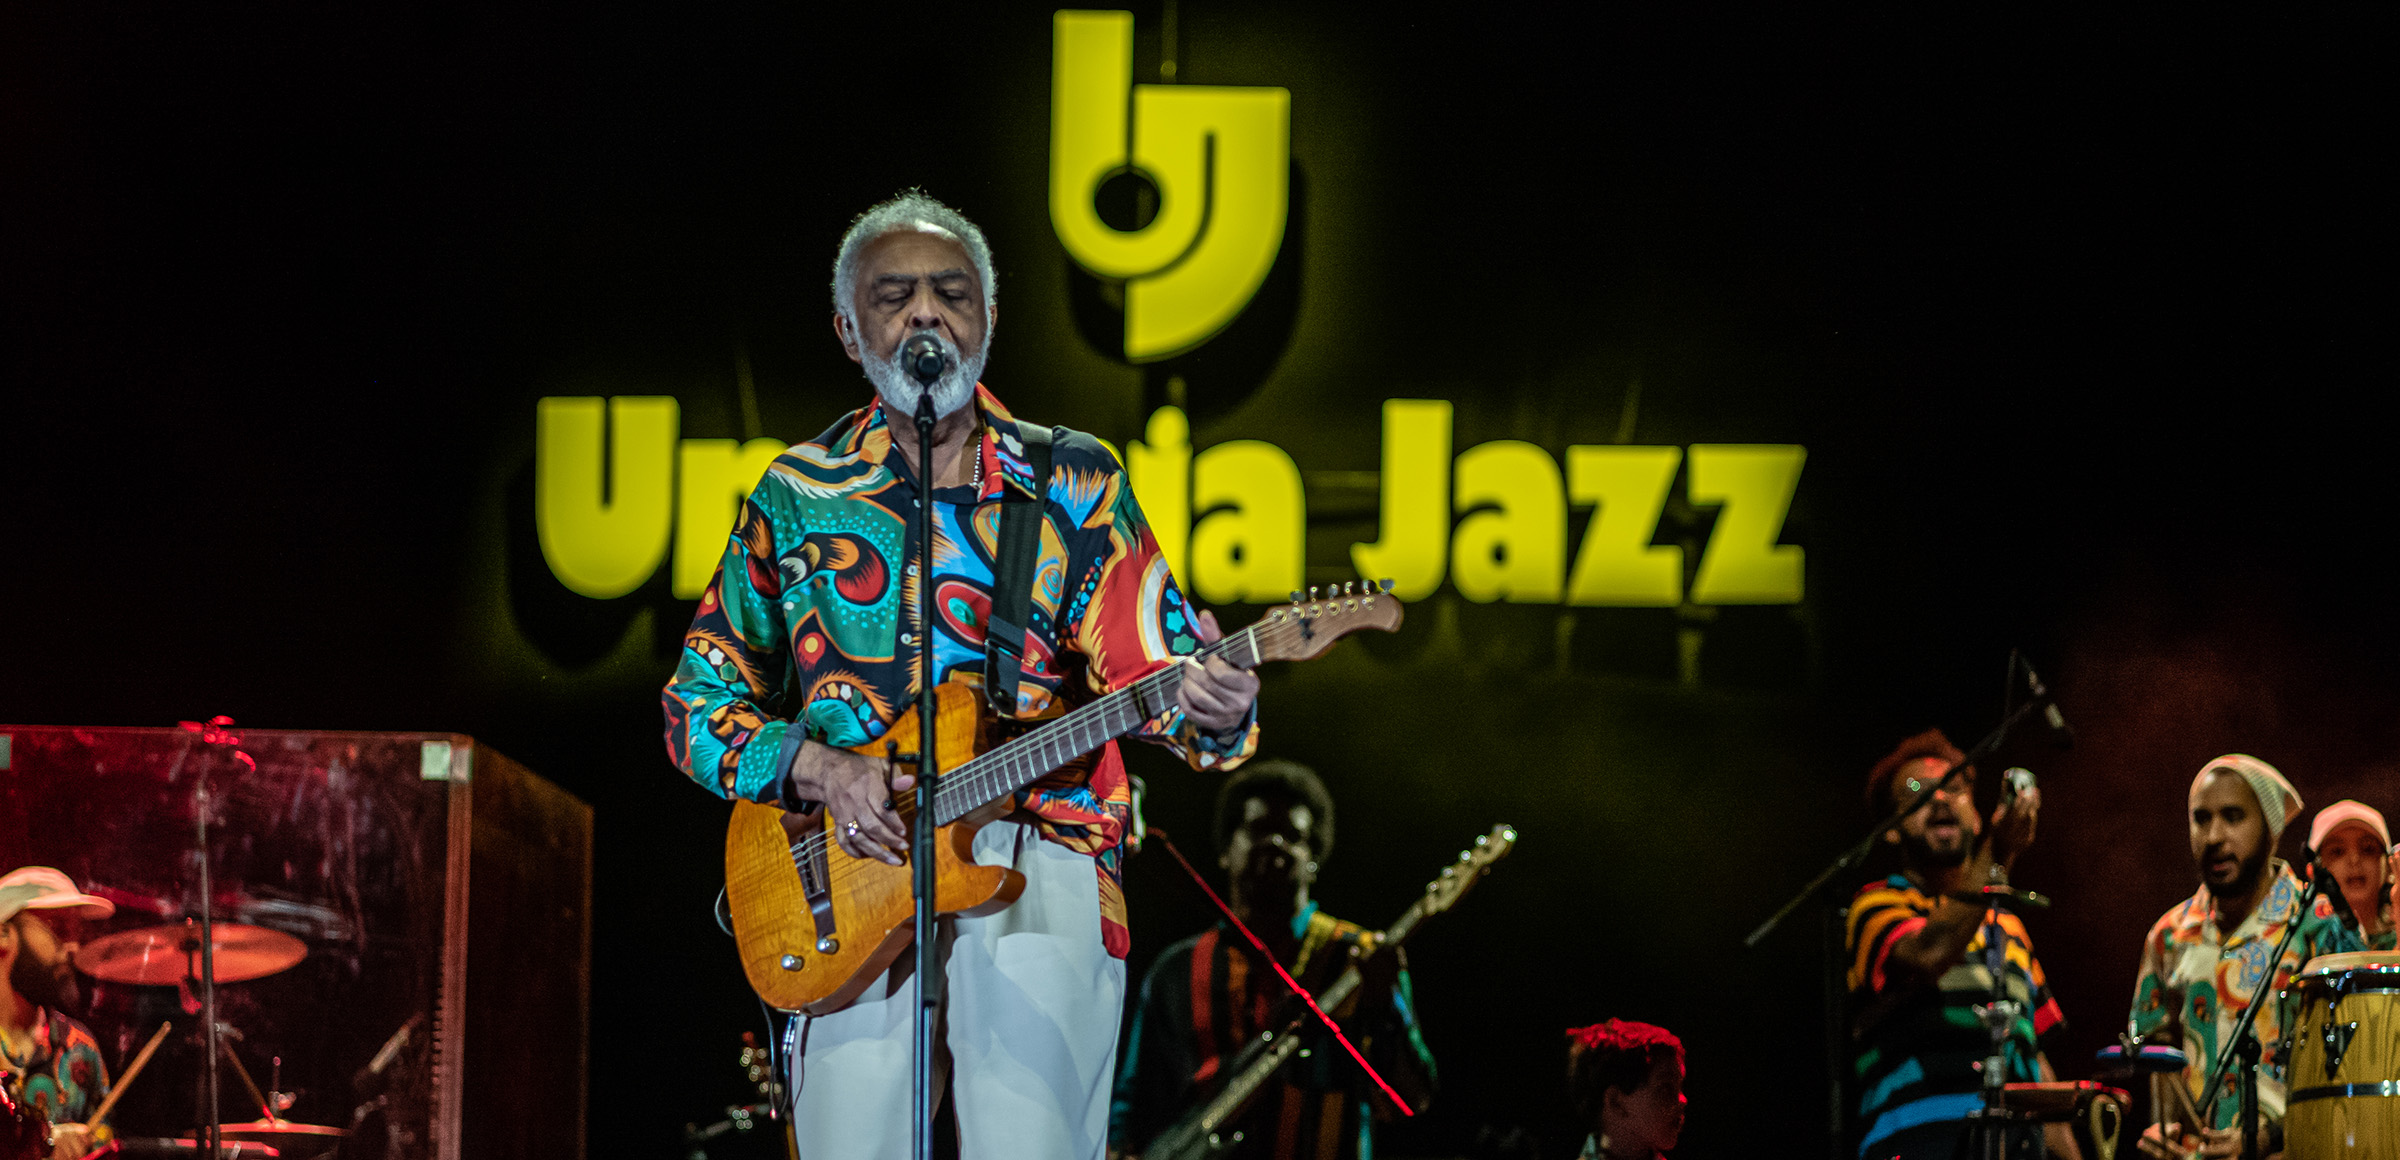 Gilberto Gil and the Green Power of Music